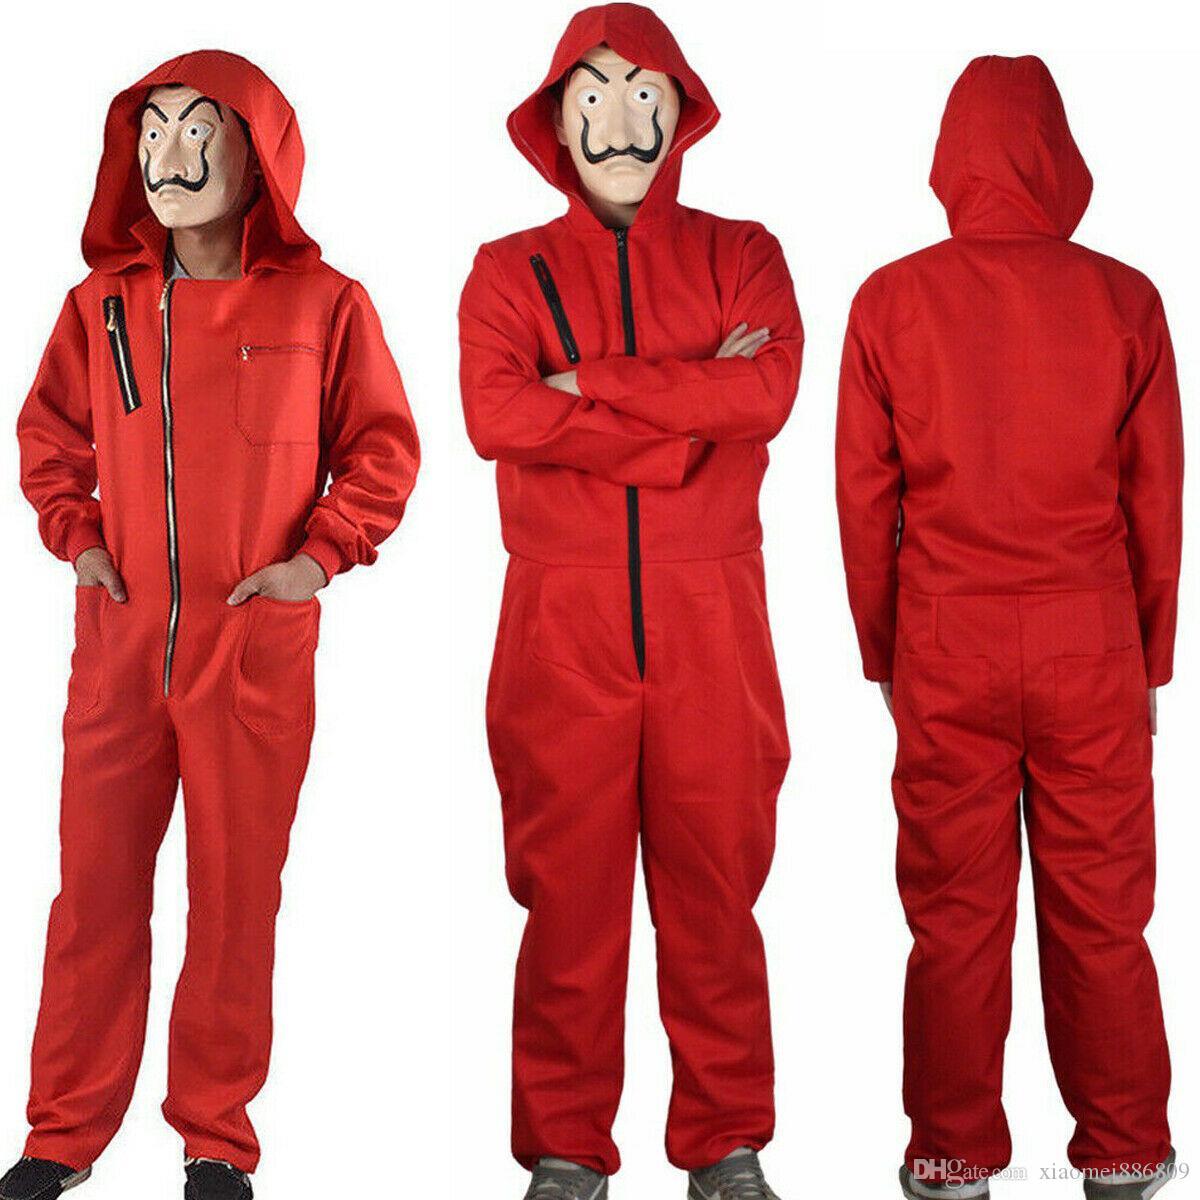 Bundle of 2 Money Heist Red Jumpsuit Costume, XL and Medium | Red jumpsuit,  Clothes design, Halloween outfits